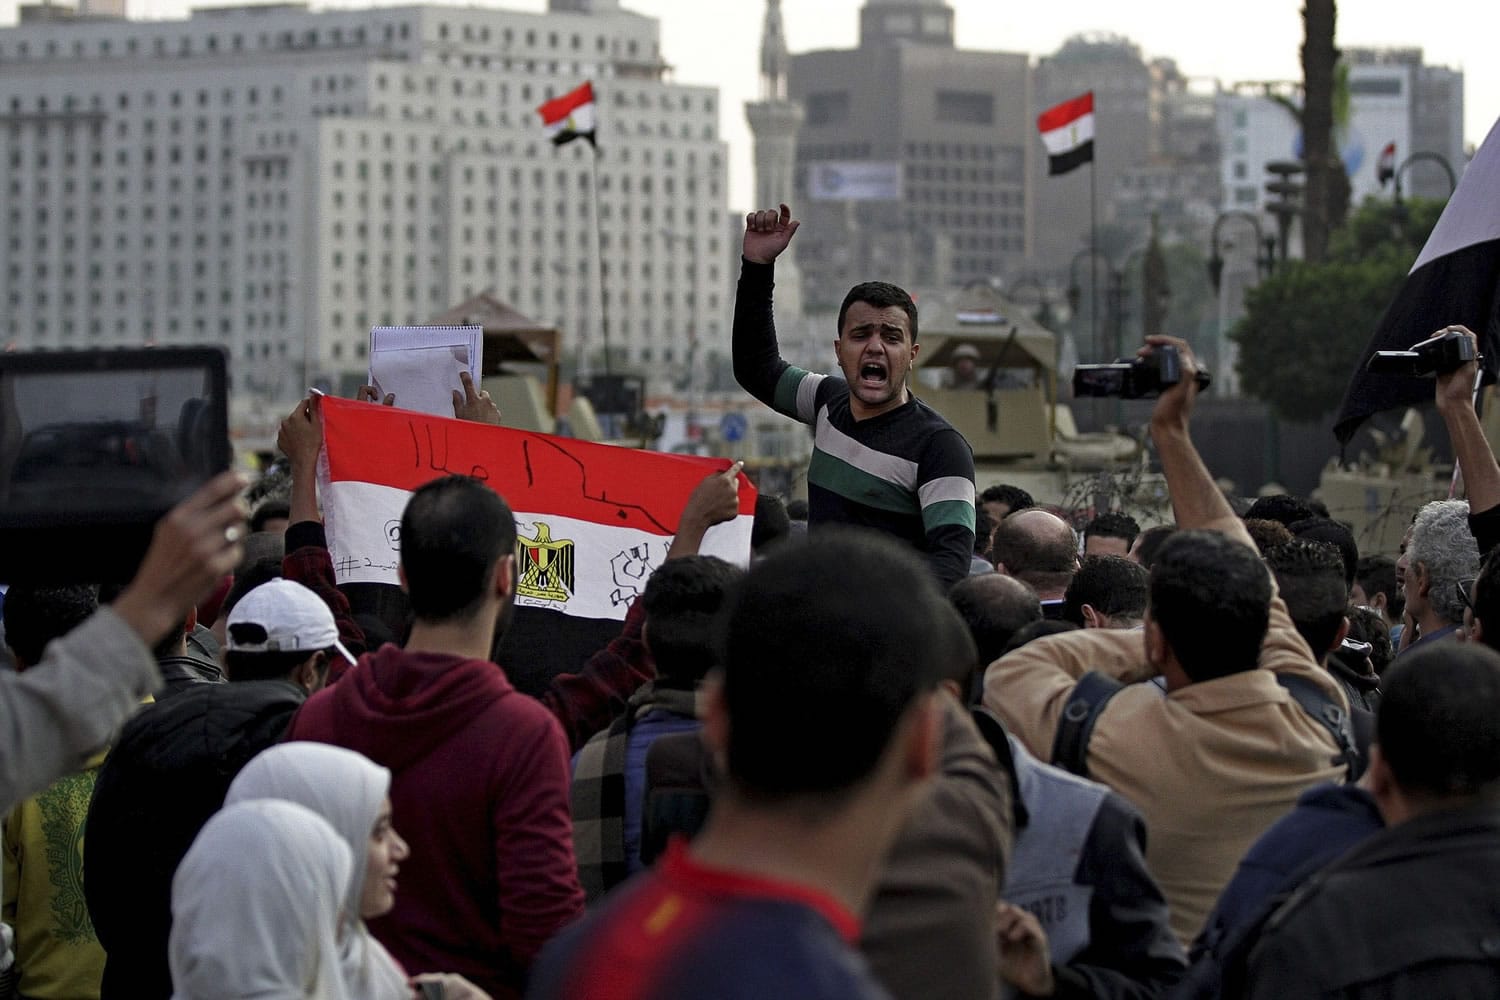 Protesters shout anti-government slogans and hold a national flag with &quot;God is great written on it,&quot; after a judge on Saturday dismissed the case against former President Hosni Mubarak and acquitted his security chief over the killing of hundreds of protesters during Egypt's 2011 uprising, near Tahrir Square, Cairo, Egypt.